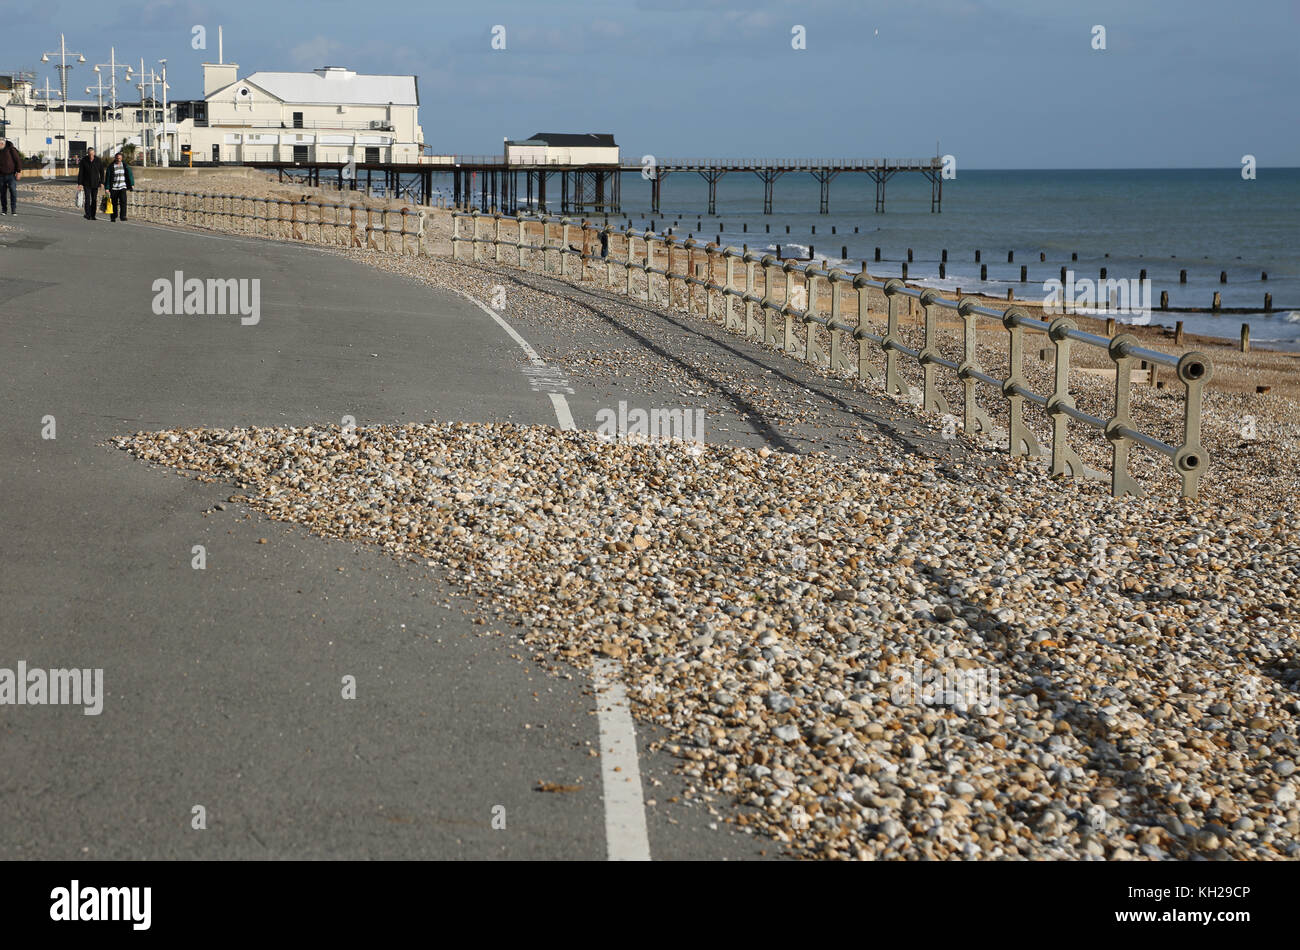 shingle overflows onto the seafront promenade in Bognor Regis, Sussex, UK, following stormy winter weather. Shows Bognor Pier in background. Stock Photo